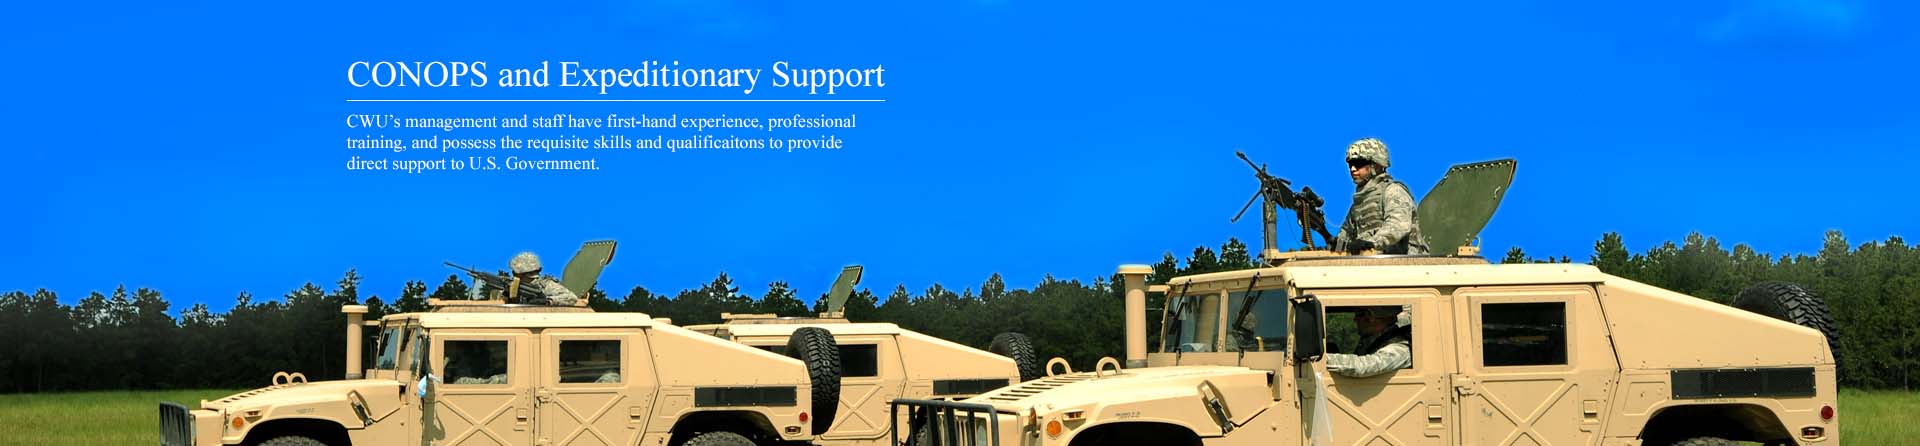 CONOPS and Expeditionary Support